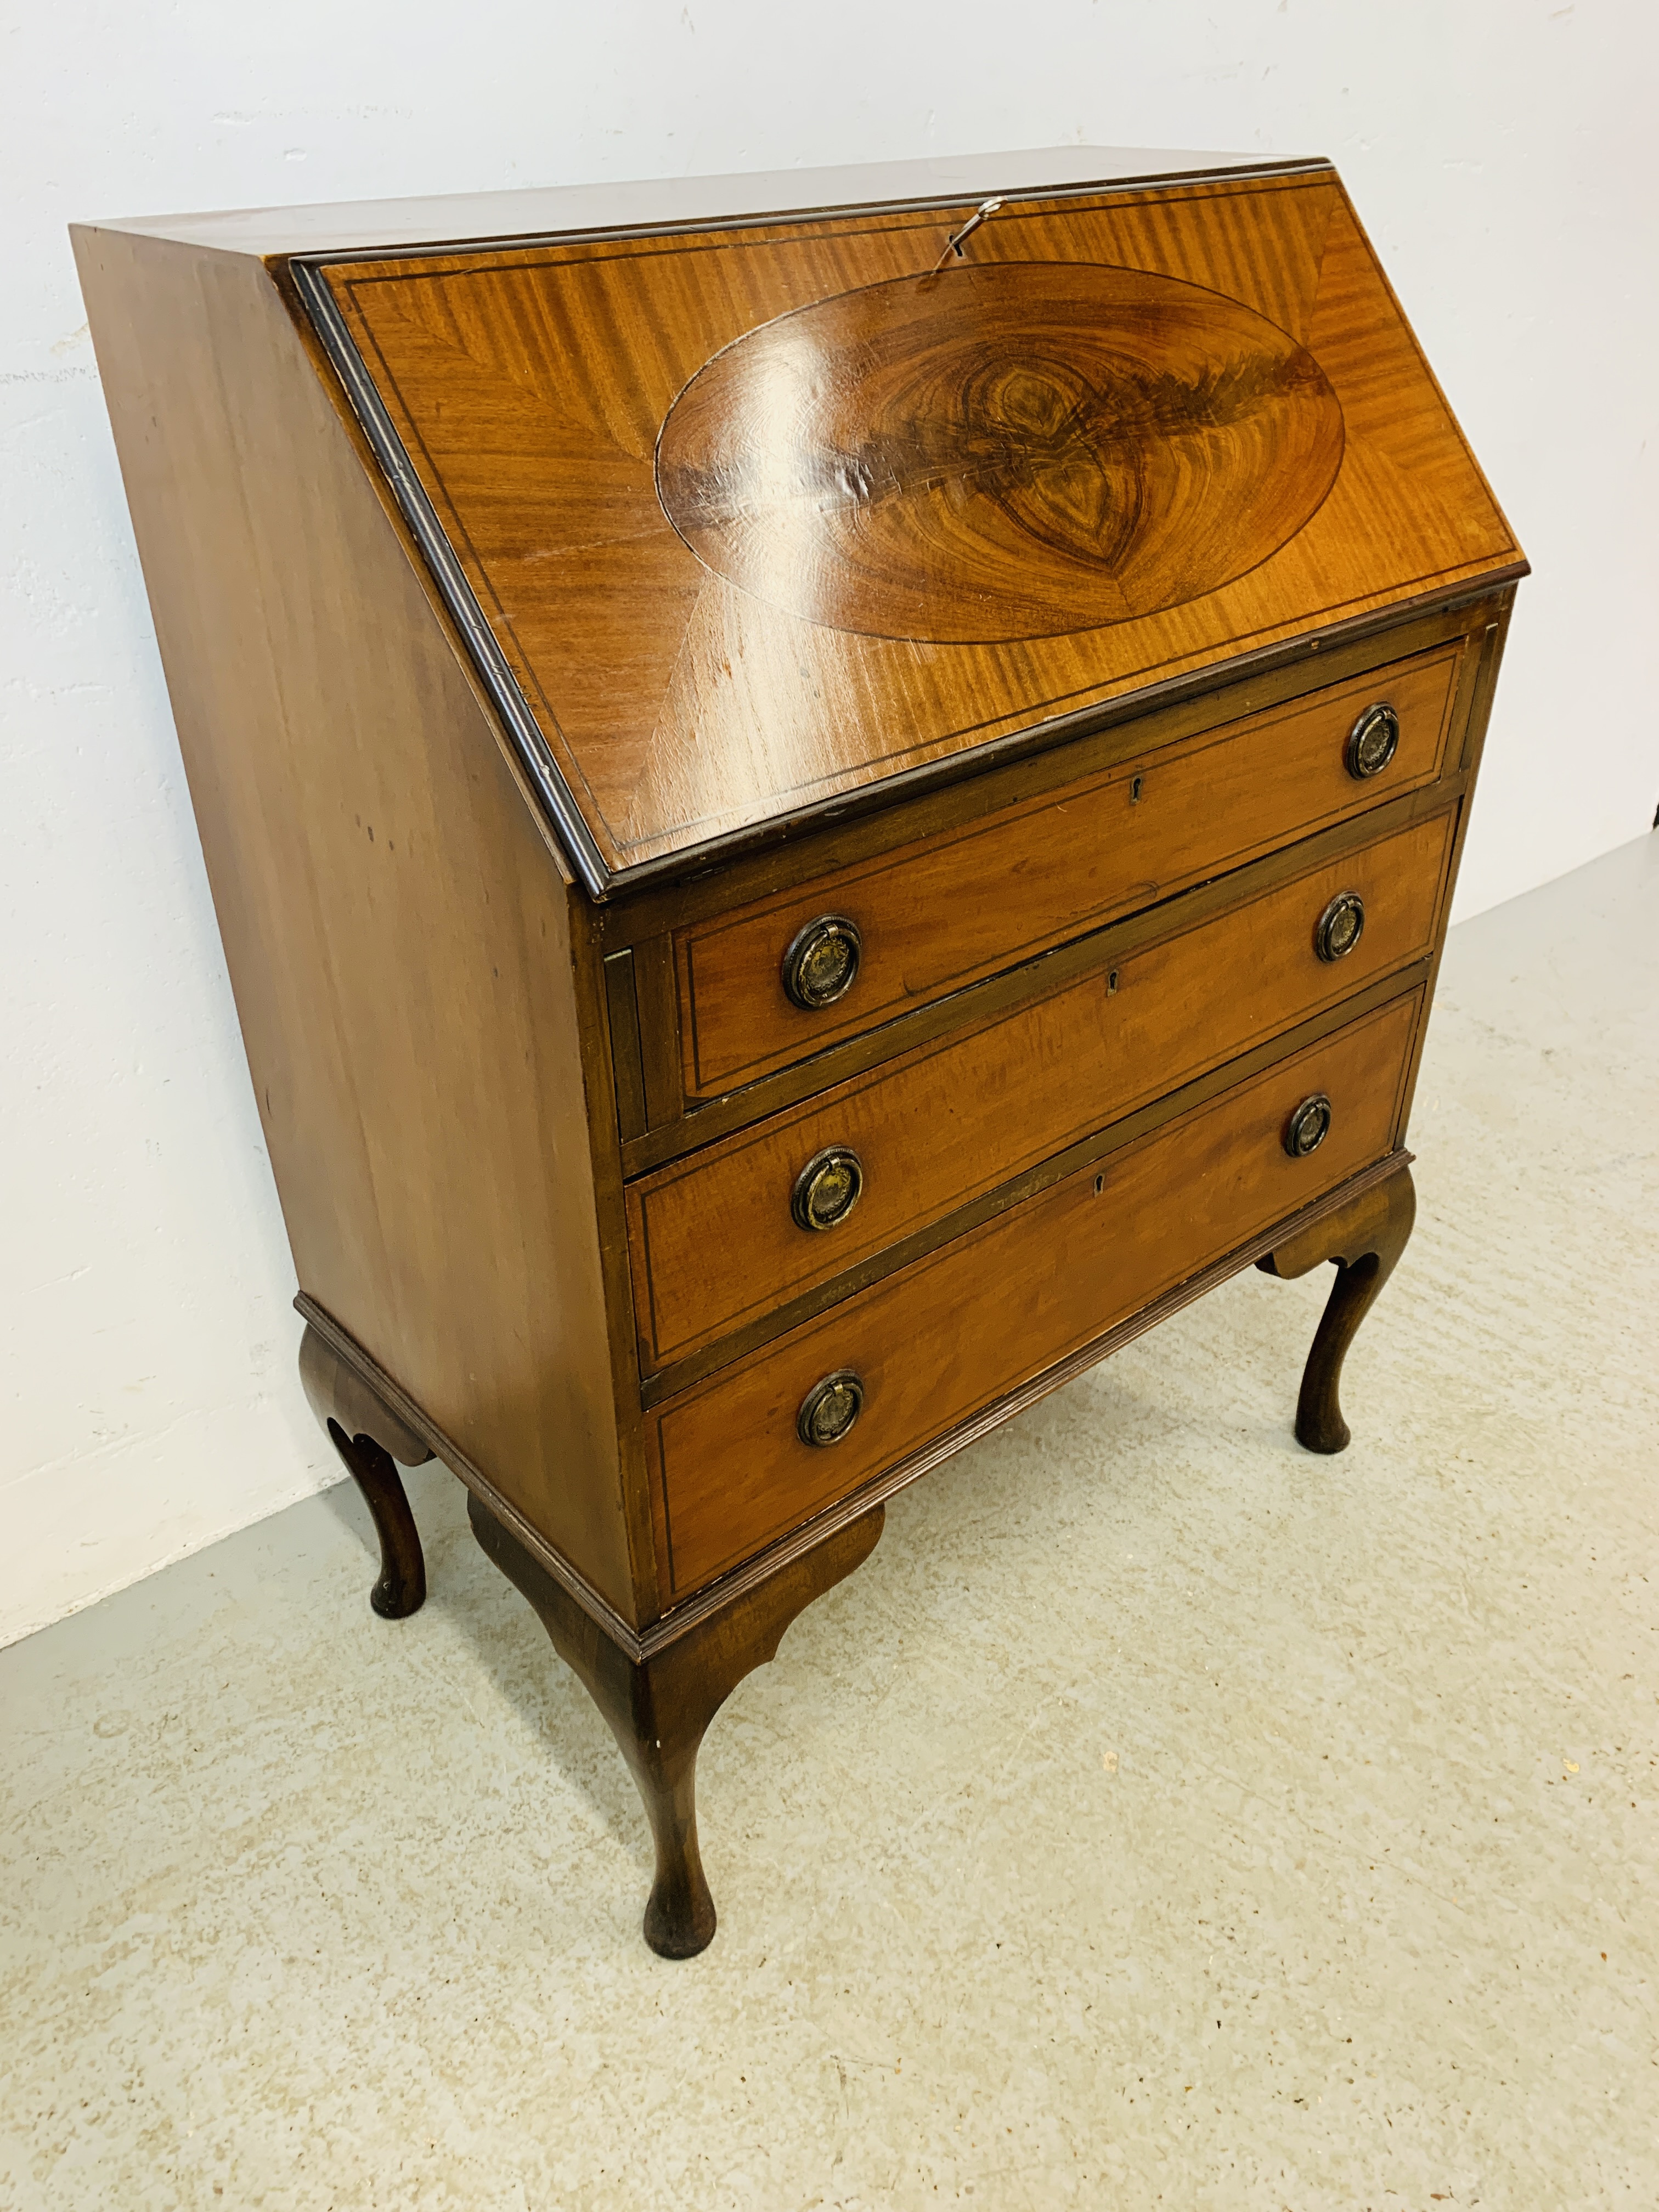 A MAHOGANY FINISH 3 DRAWER BUREAU WITH INLAID DETAIL - Image 4 of 6